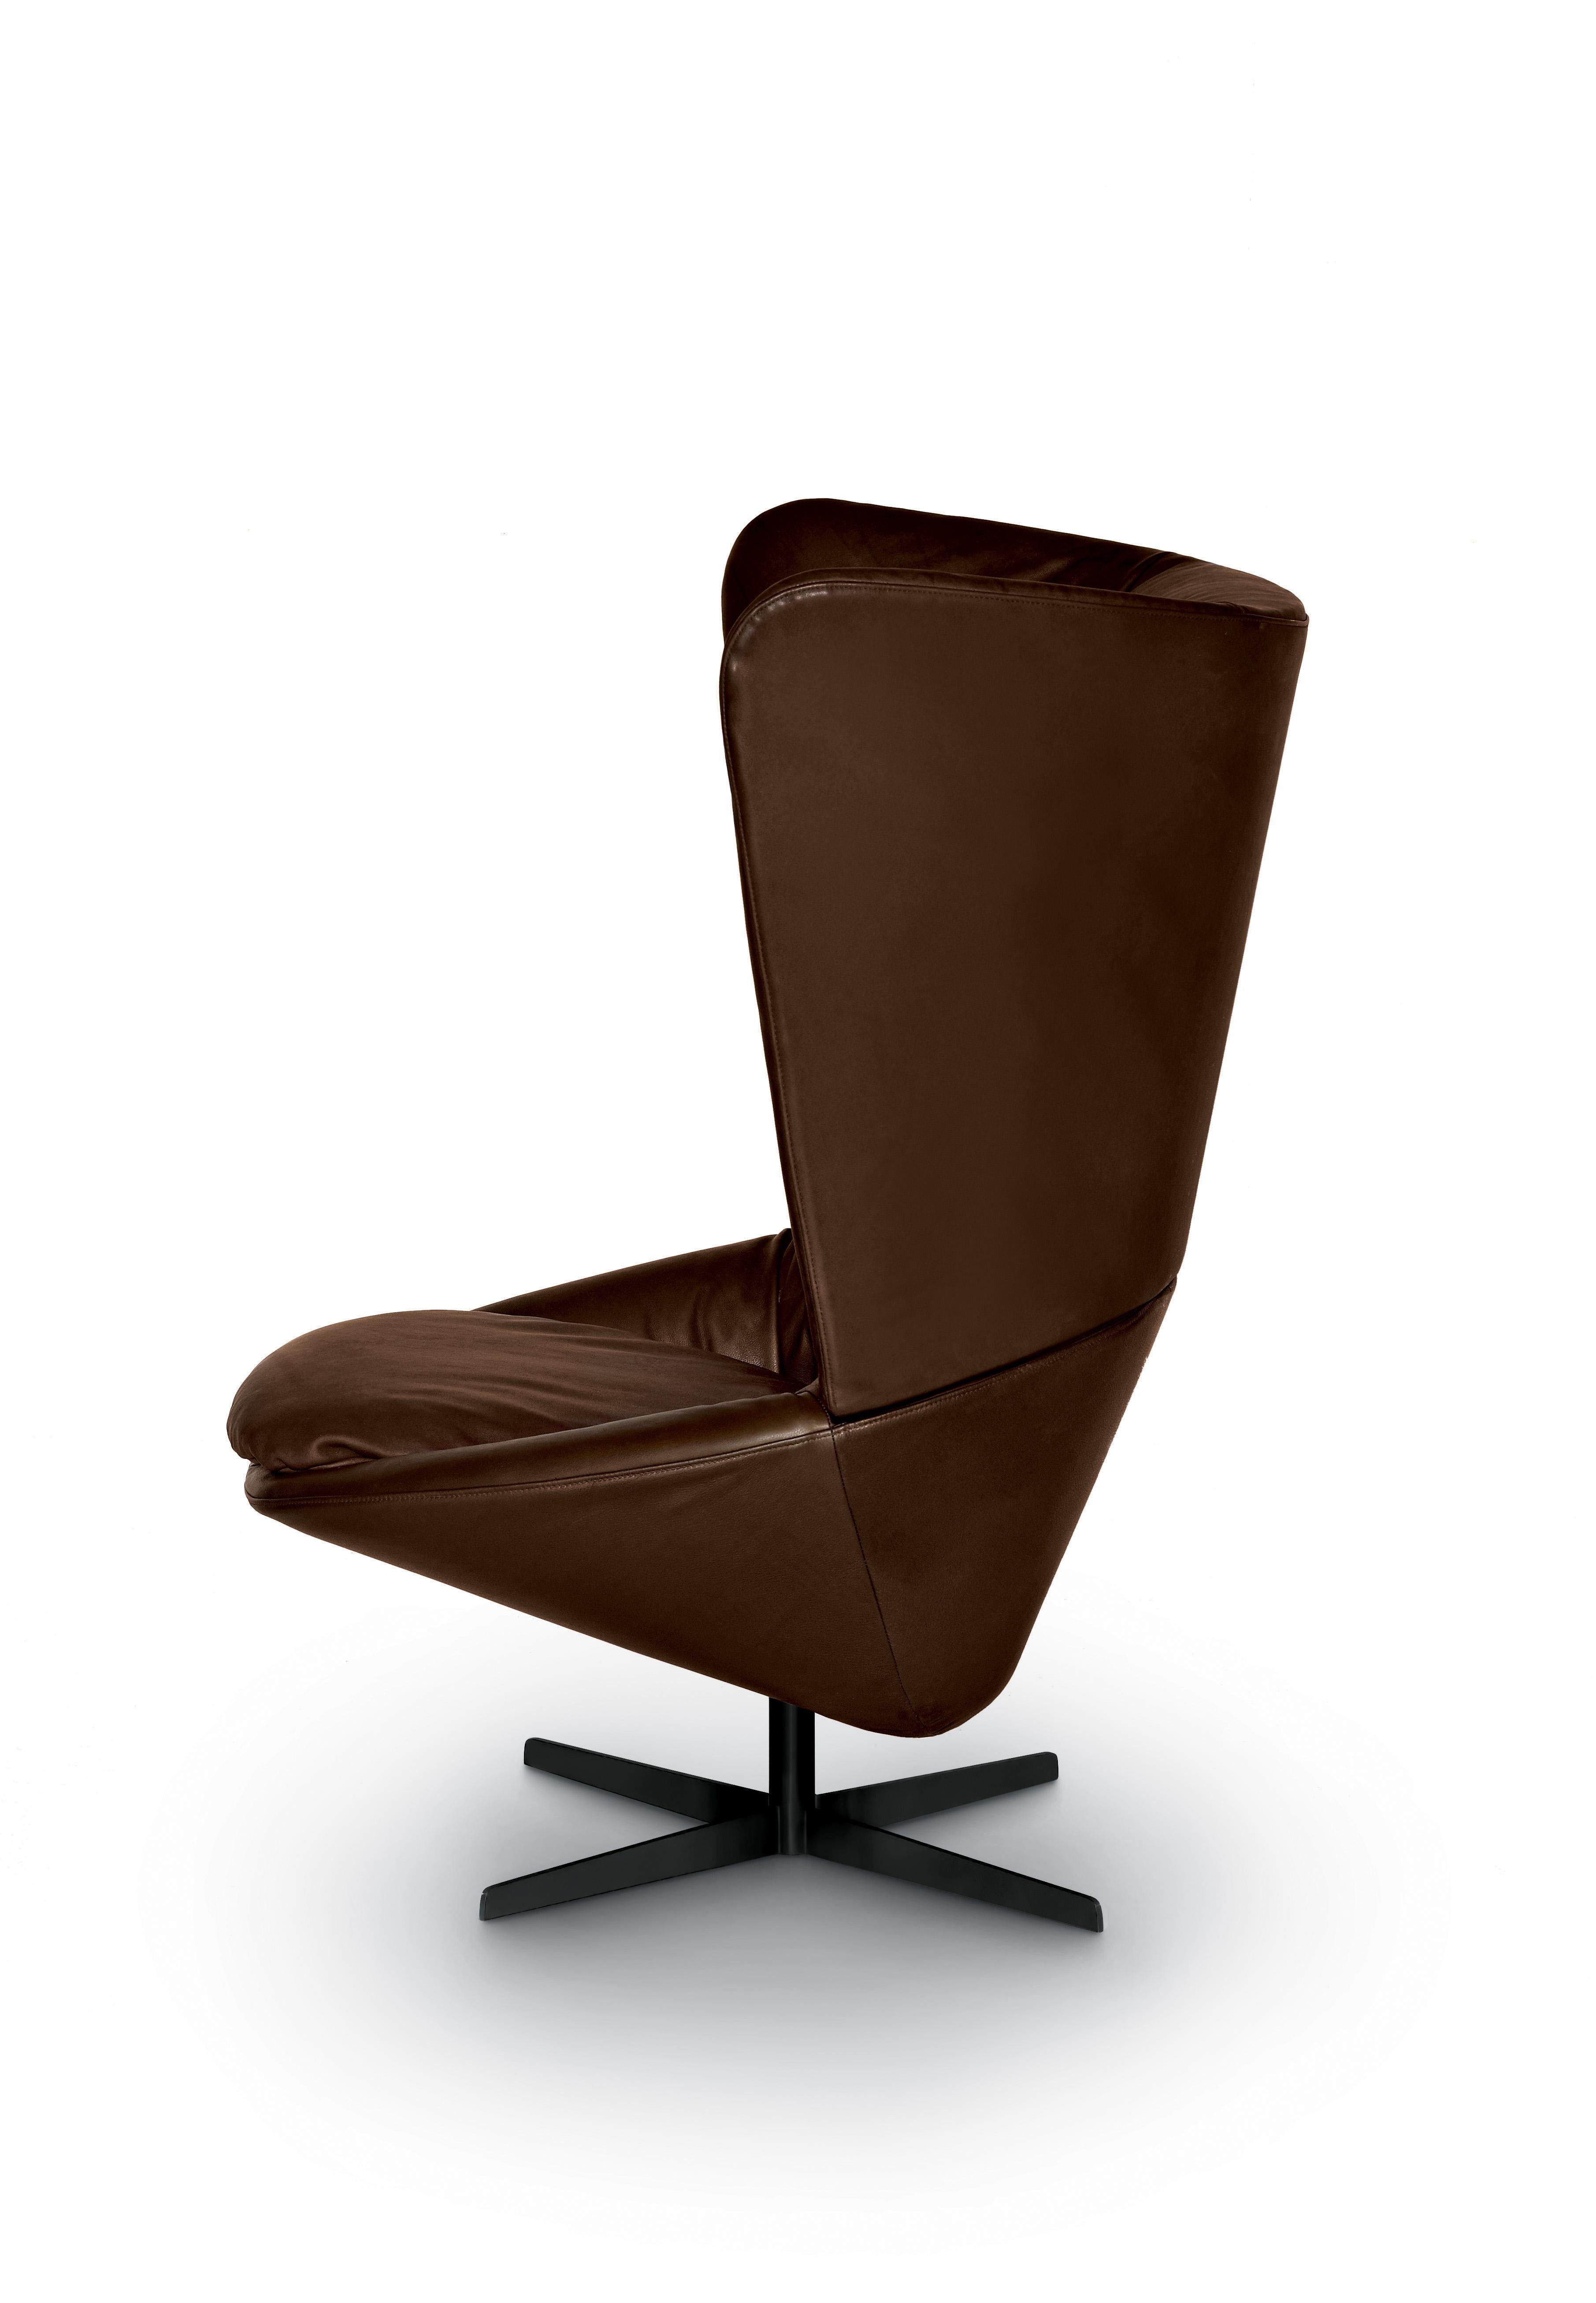 Modern Arflex Ladle Armchair with High Backrest in Giada Leather by Luca Nichetto For Sale